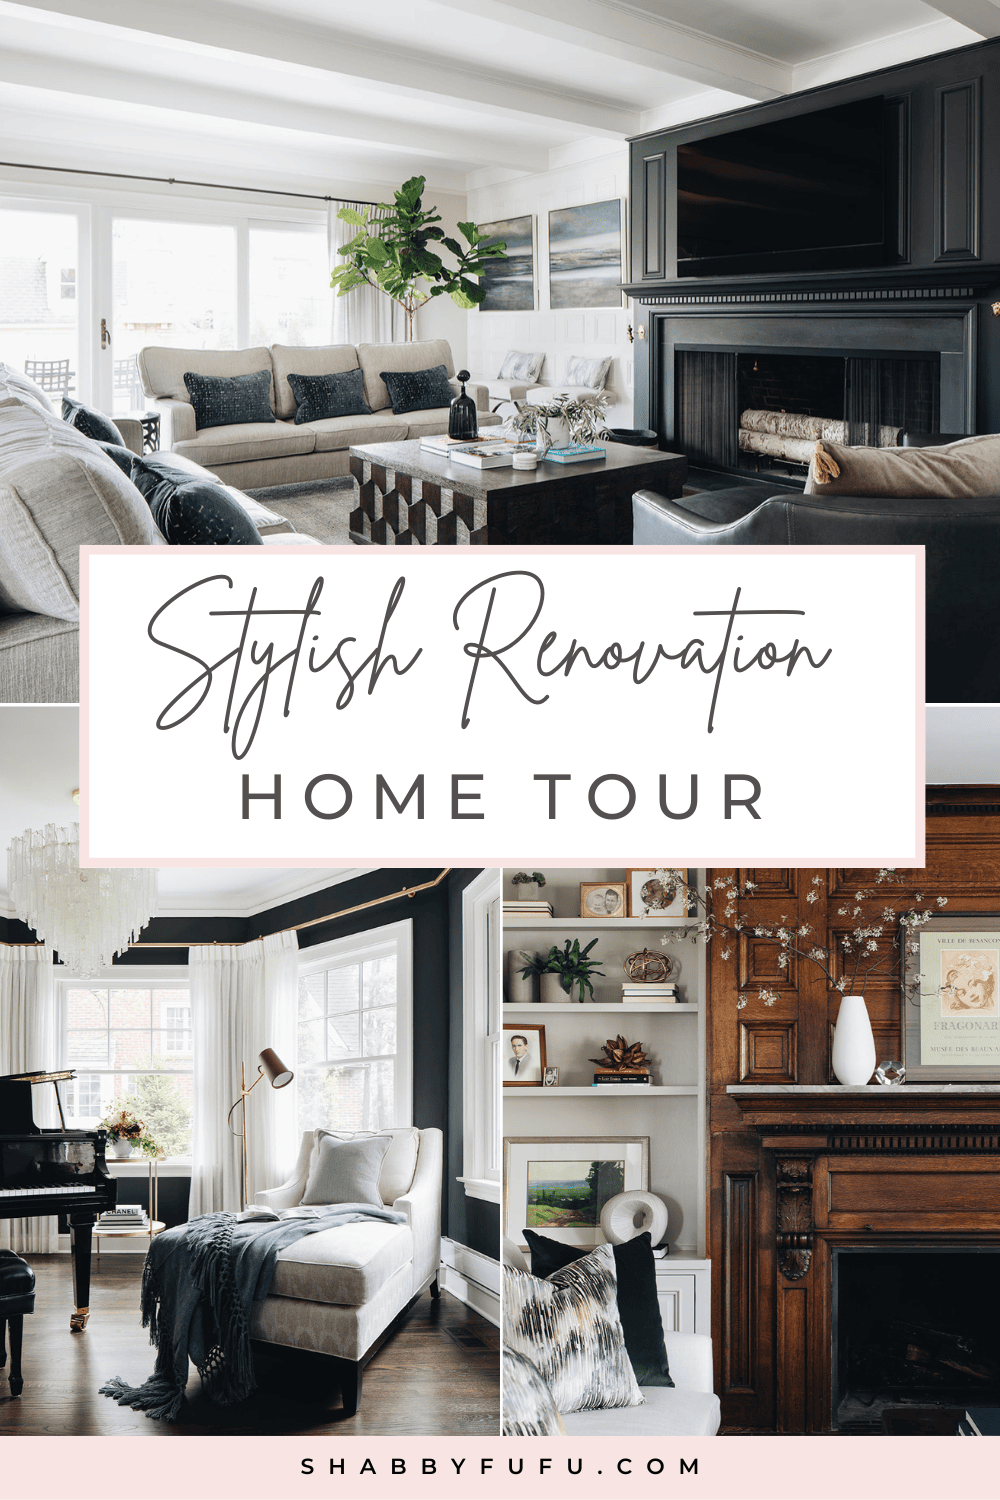 Pinterest decorfative graphic featuring a collage of pictures from home tour titled "Stylish Renovation Home Tour"